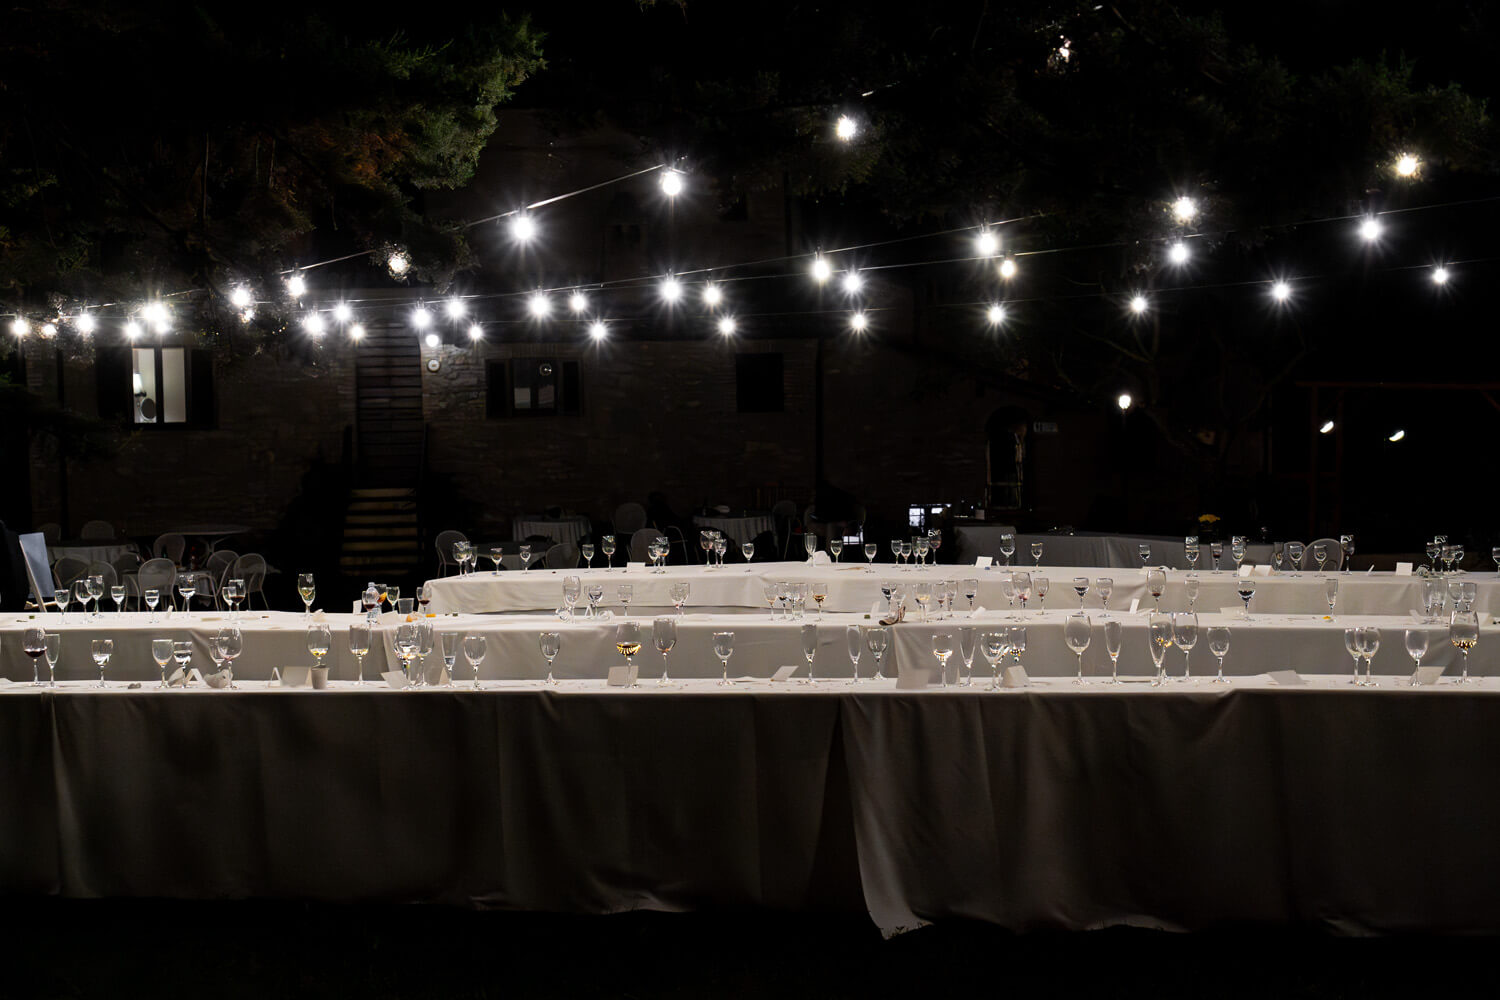 An elegantly set long dining table awaits guests at an outdoor evening event, with strings of lights creating a festive canopy above. The soft glow against the night sky lends an intimate ambiance to the setting.